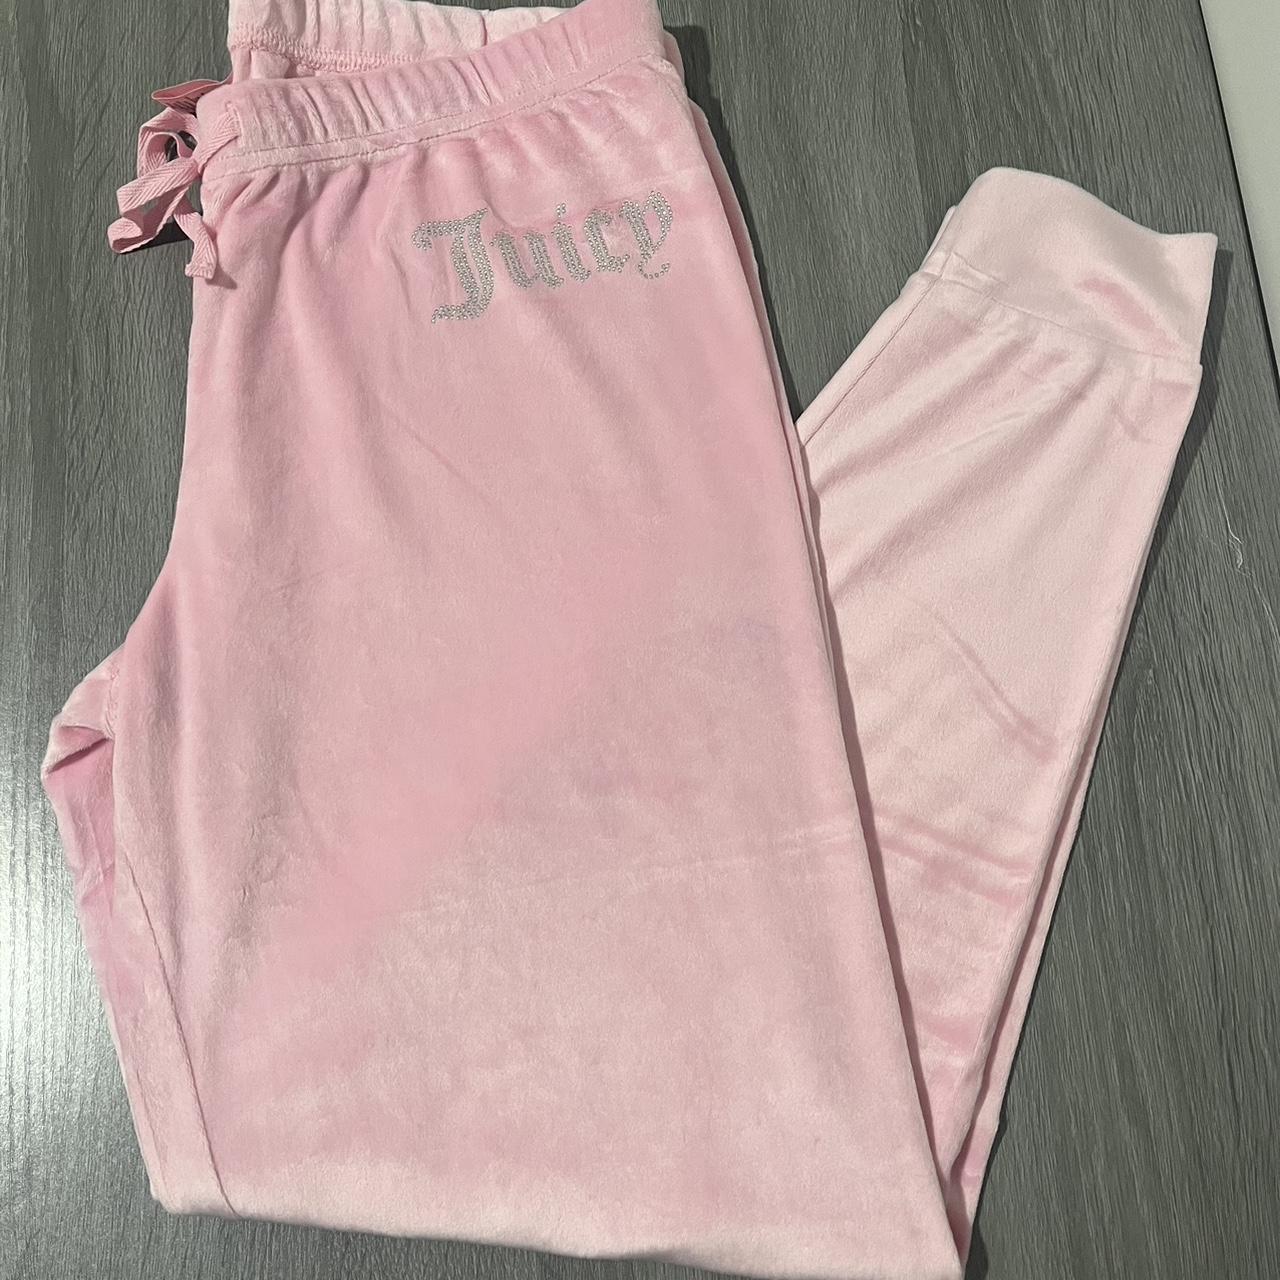 Juicy Couture Women's Pink and Silver Pajamas | Depop